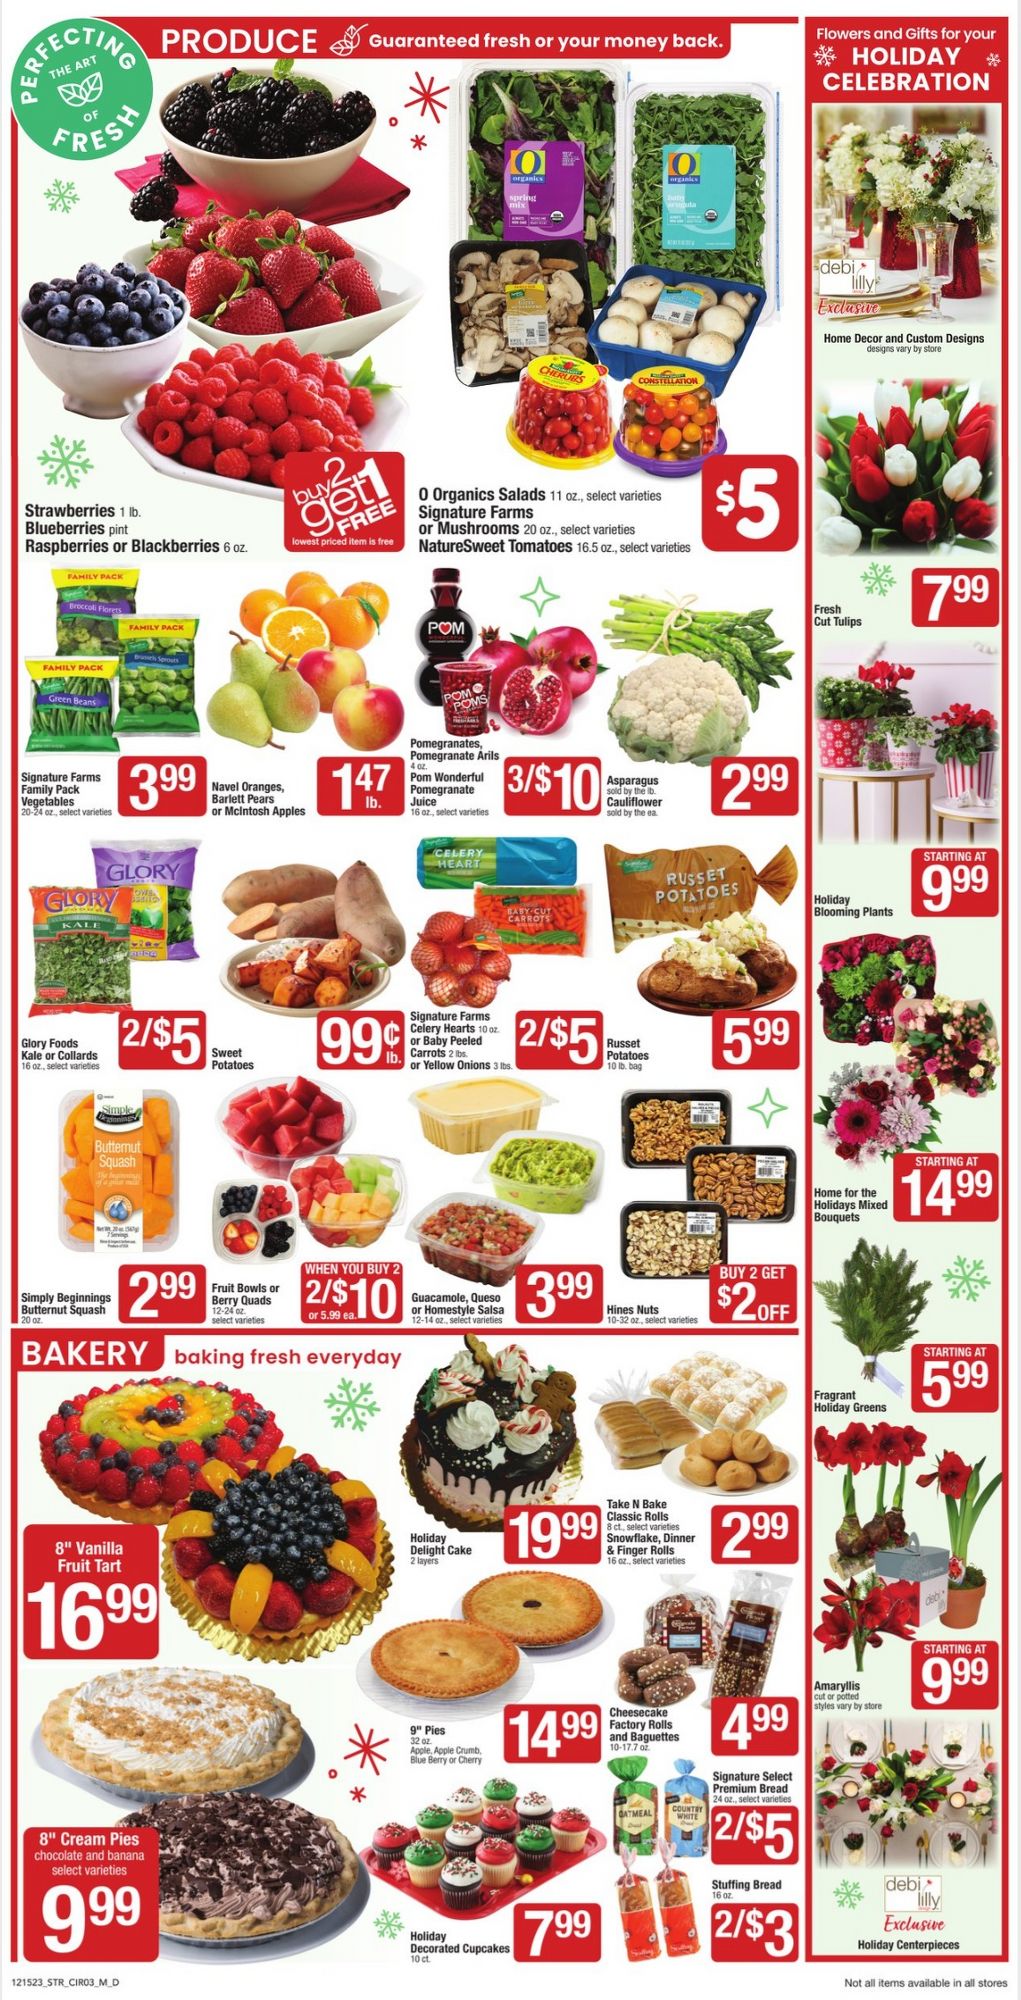 Star Market Christmas July 2024 Weekly Sales, Deals, Discounts and Digital Coupons.